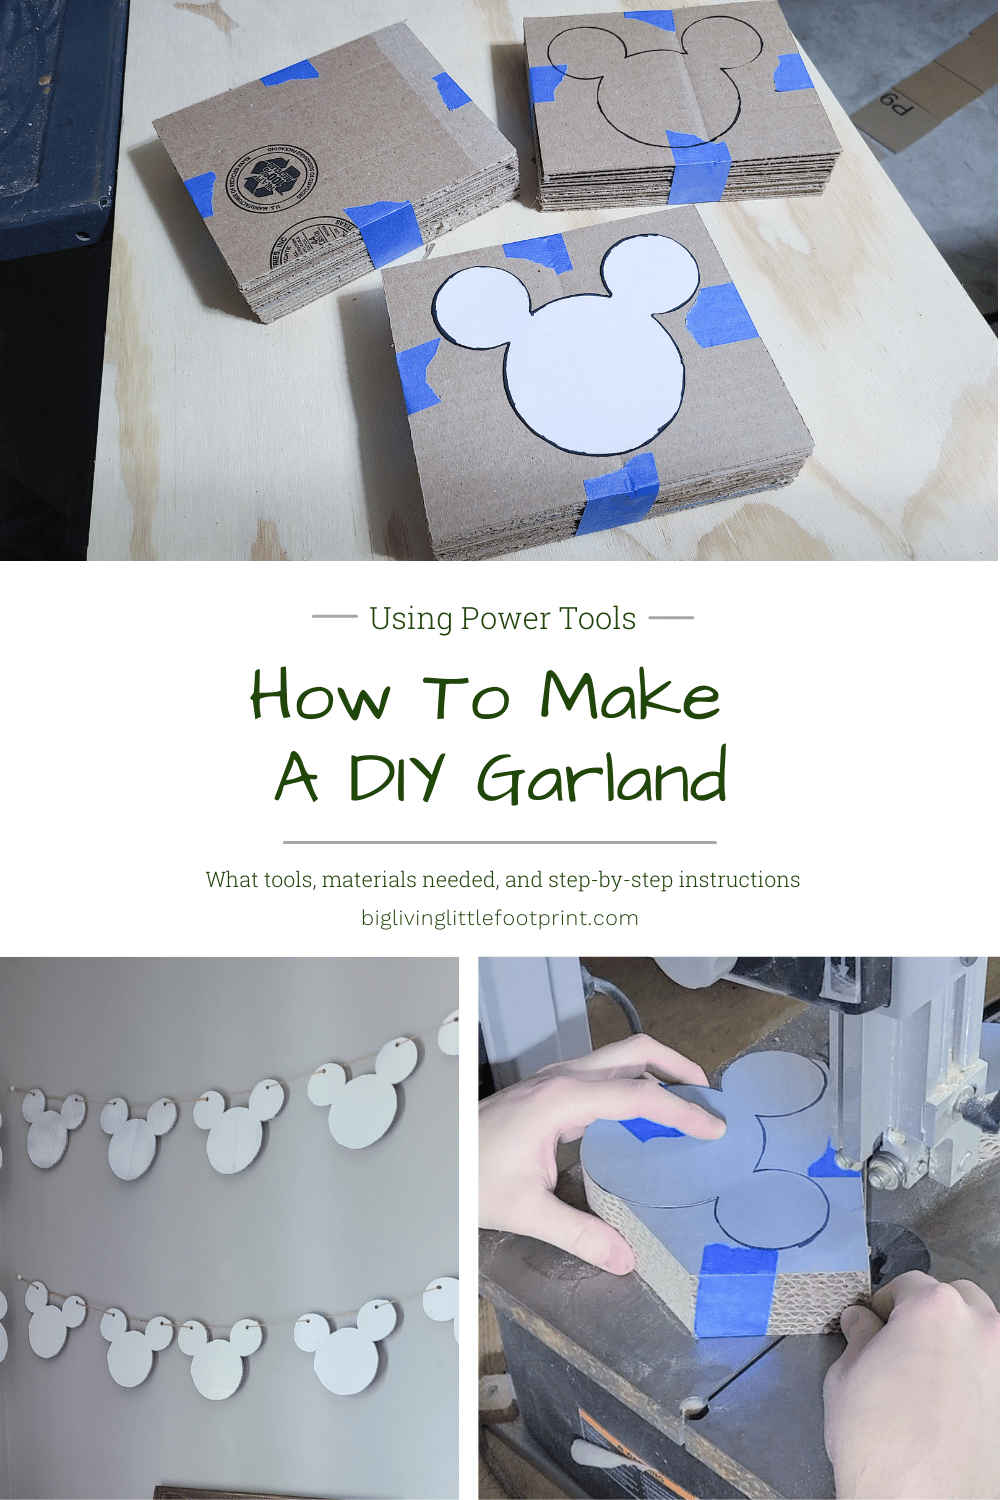 How to make a DIY garland using power tools